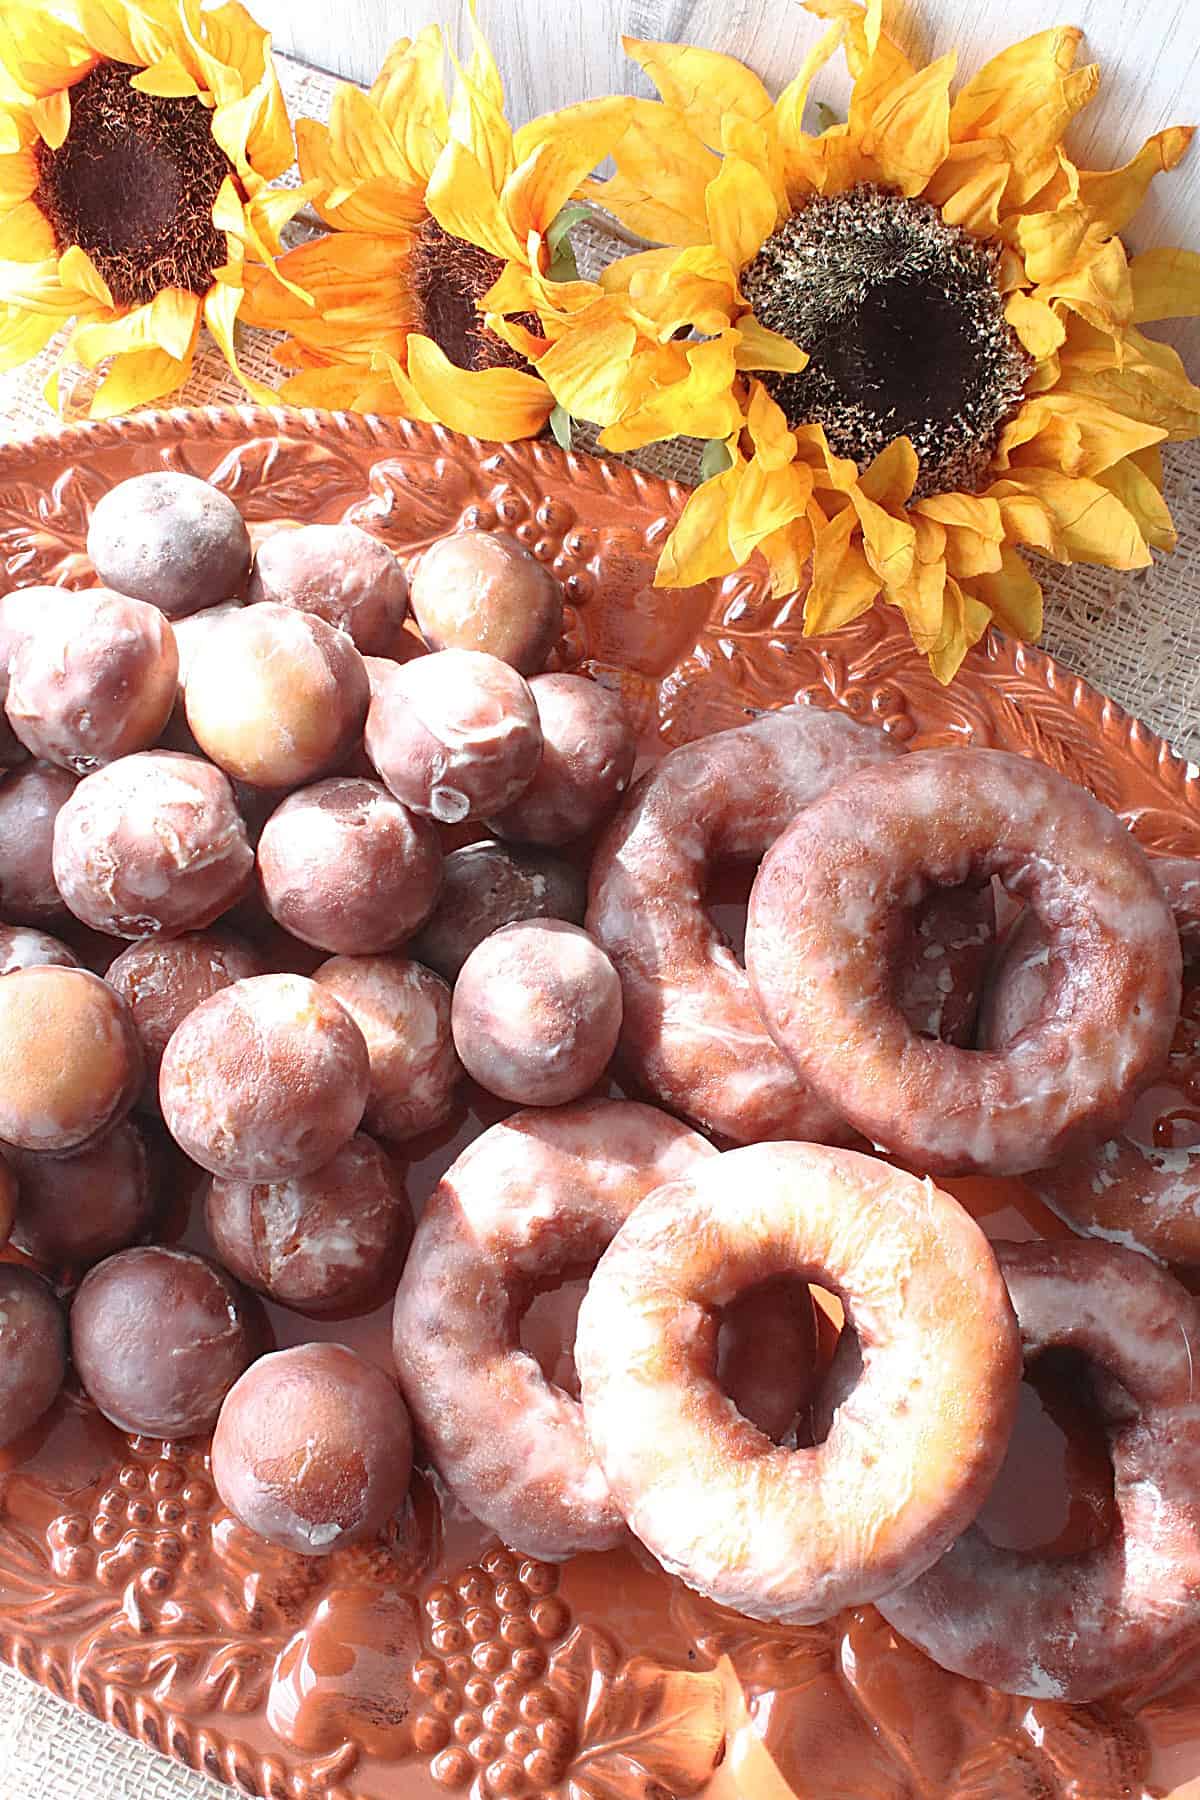 Donut holes and Glazed Apple Cider Donuts on an orange platter with sunflowers in the background.